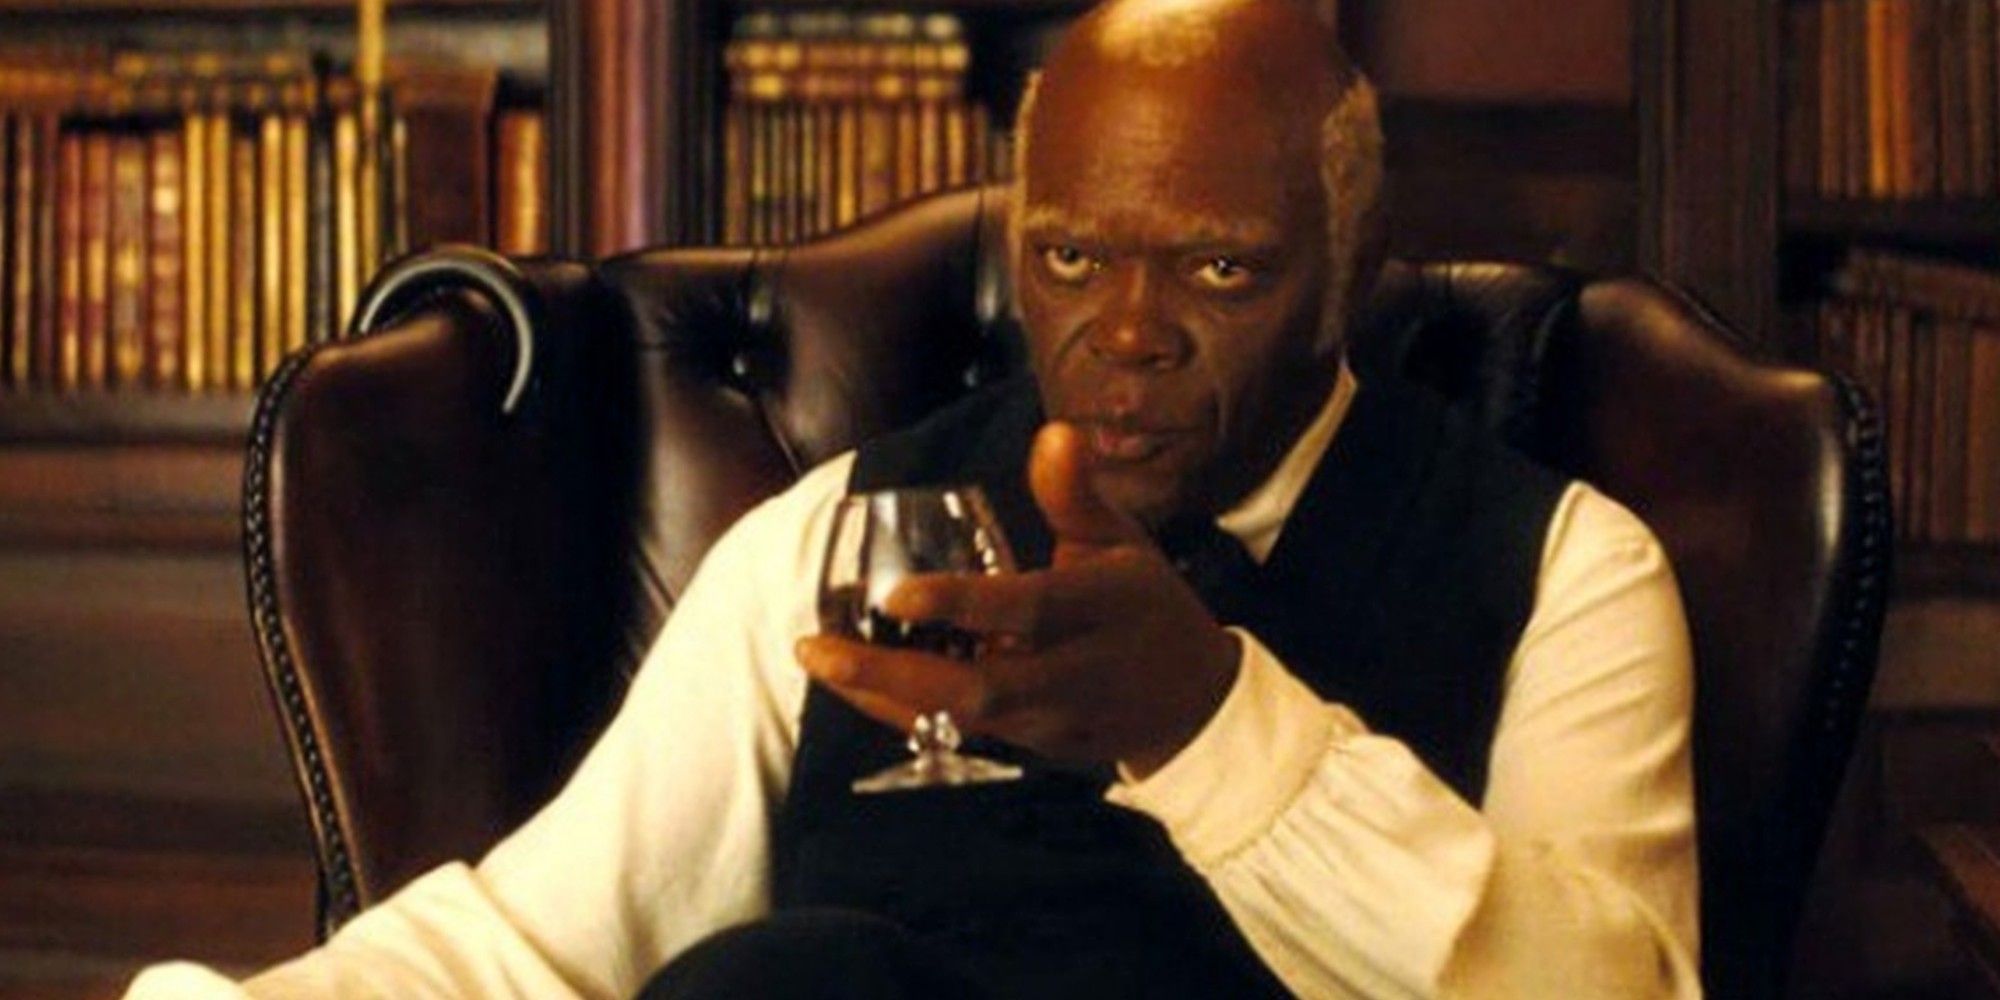 Stephen sitting down and holding a drink in his hand in Django Unchained